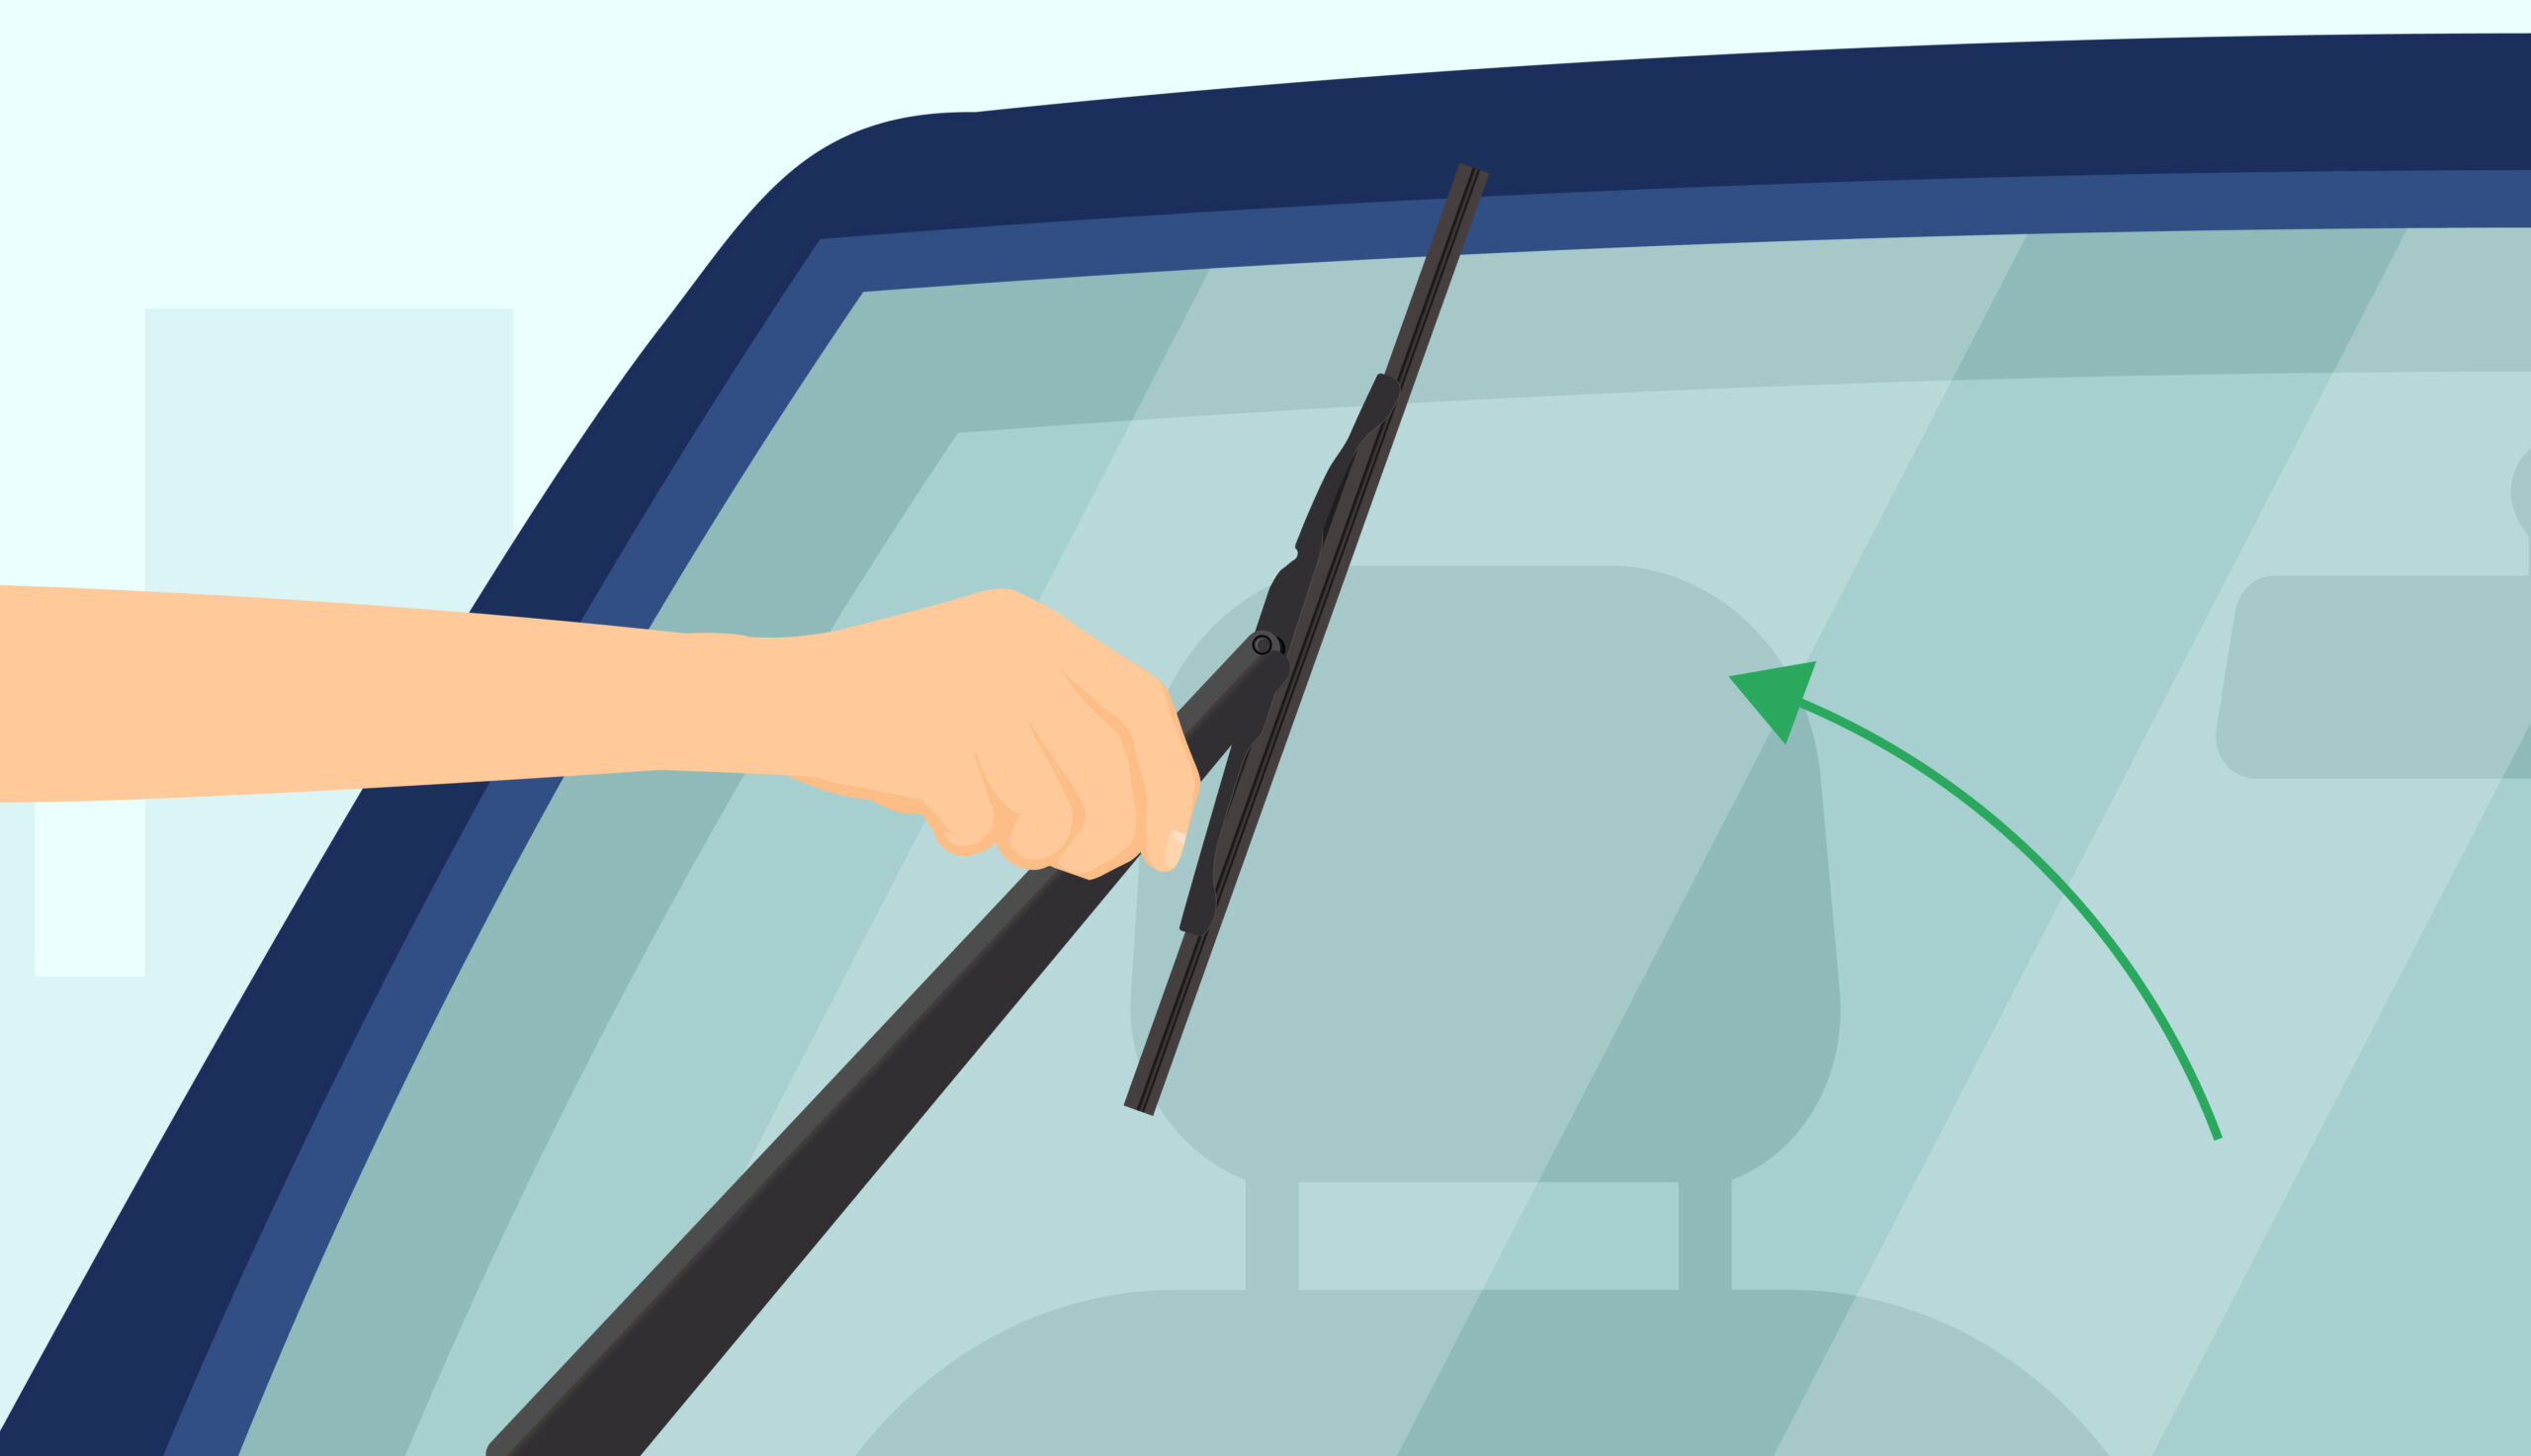 How To Get Rid of Windshield Wiper Streaks - In The Garage with